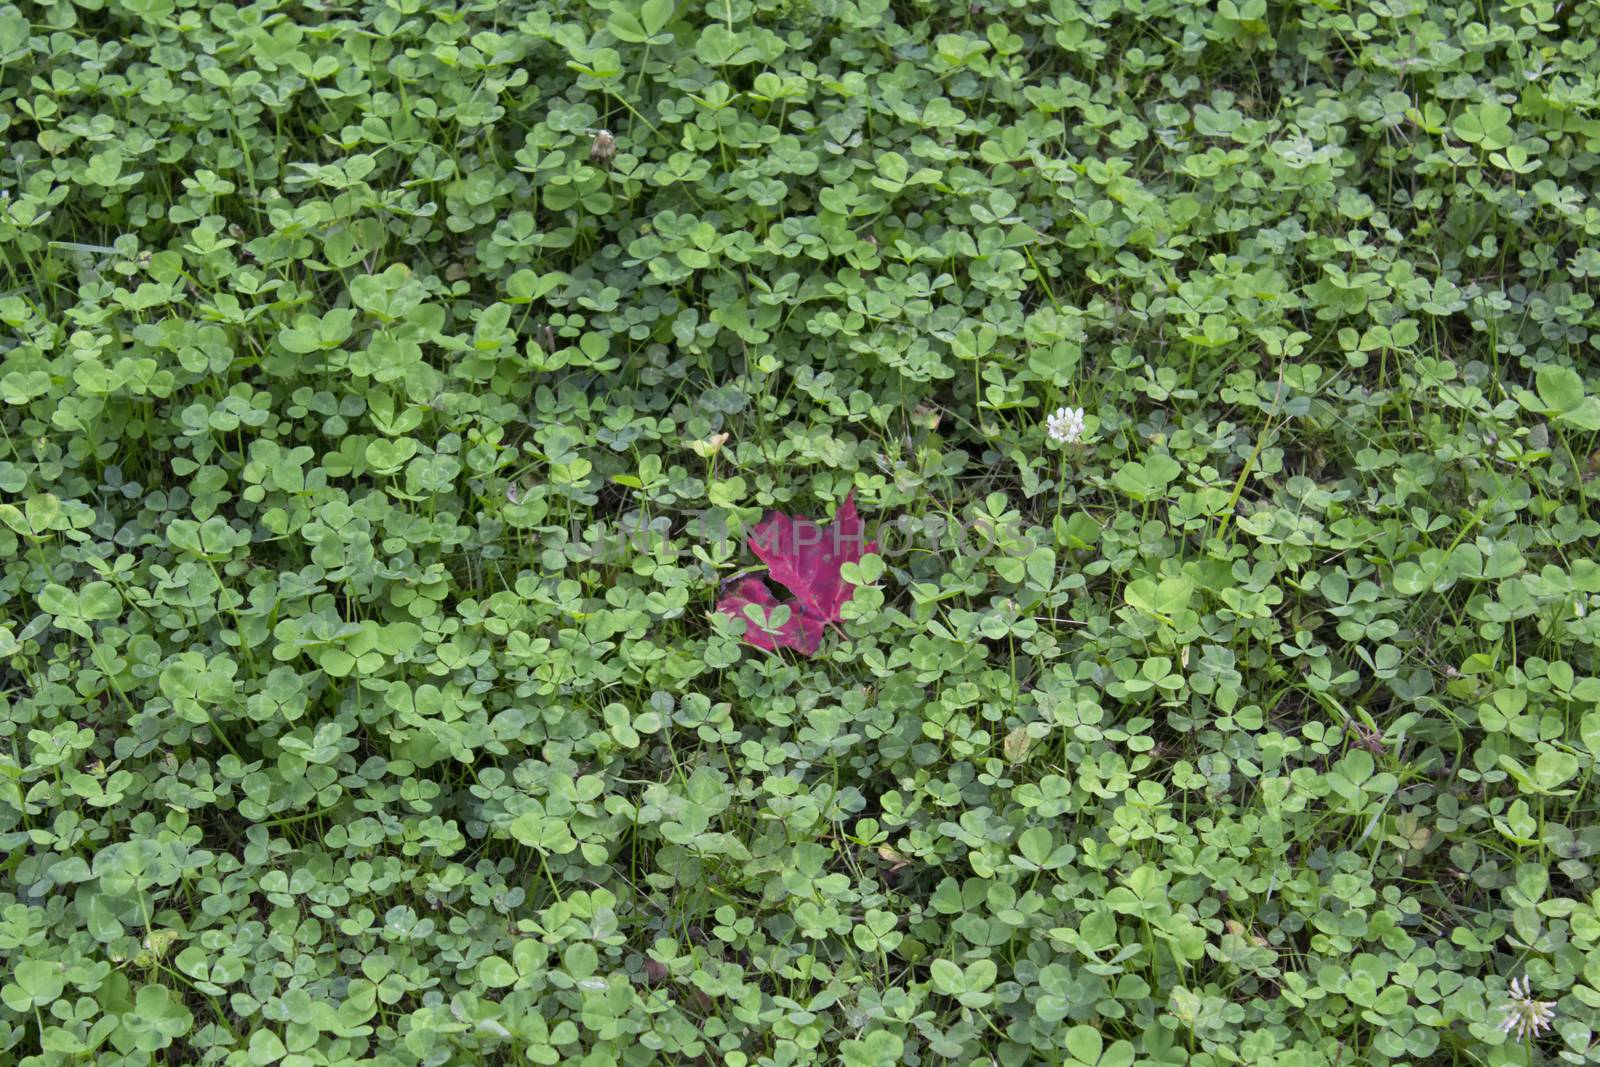 Field of clover with red maple leaf by CharlieFloyd